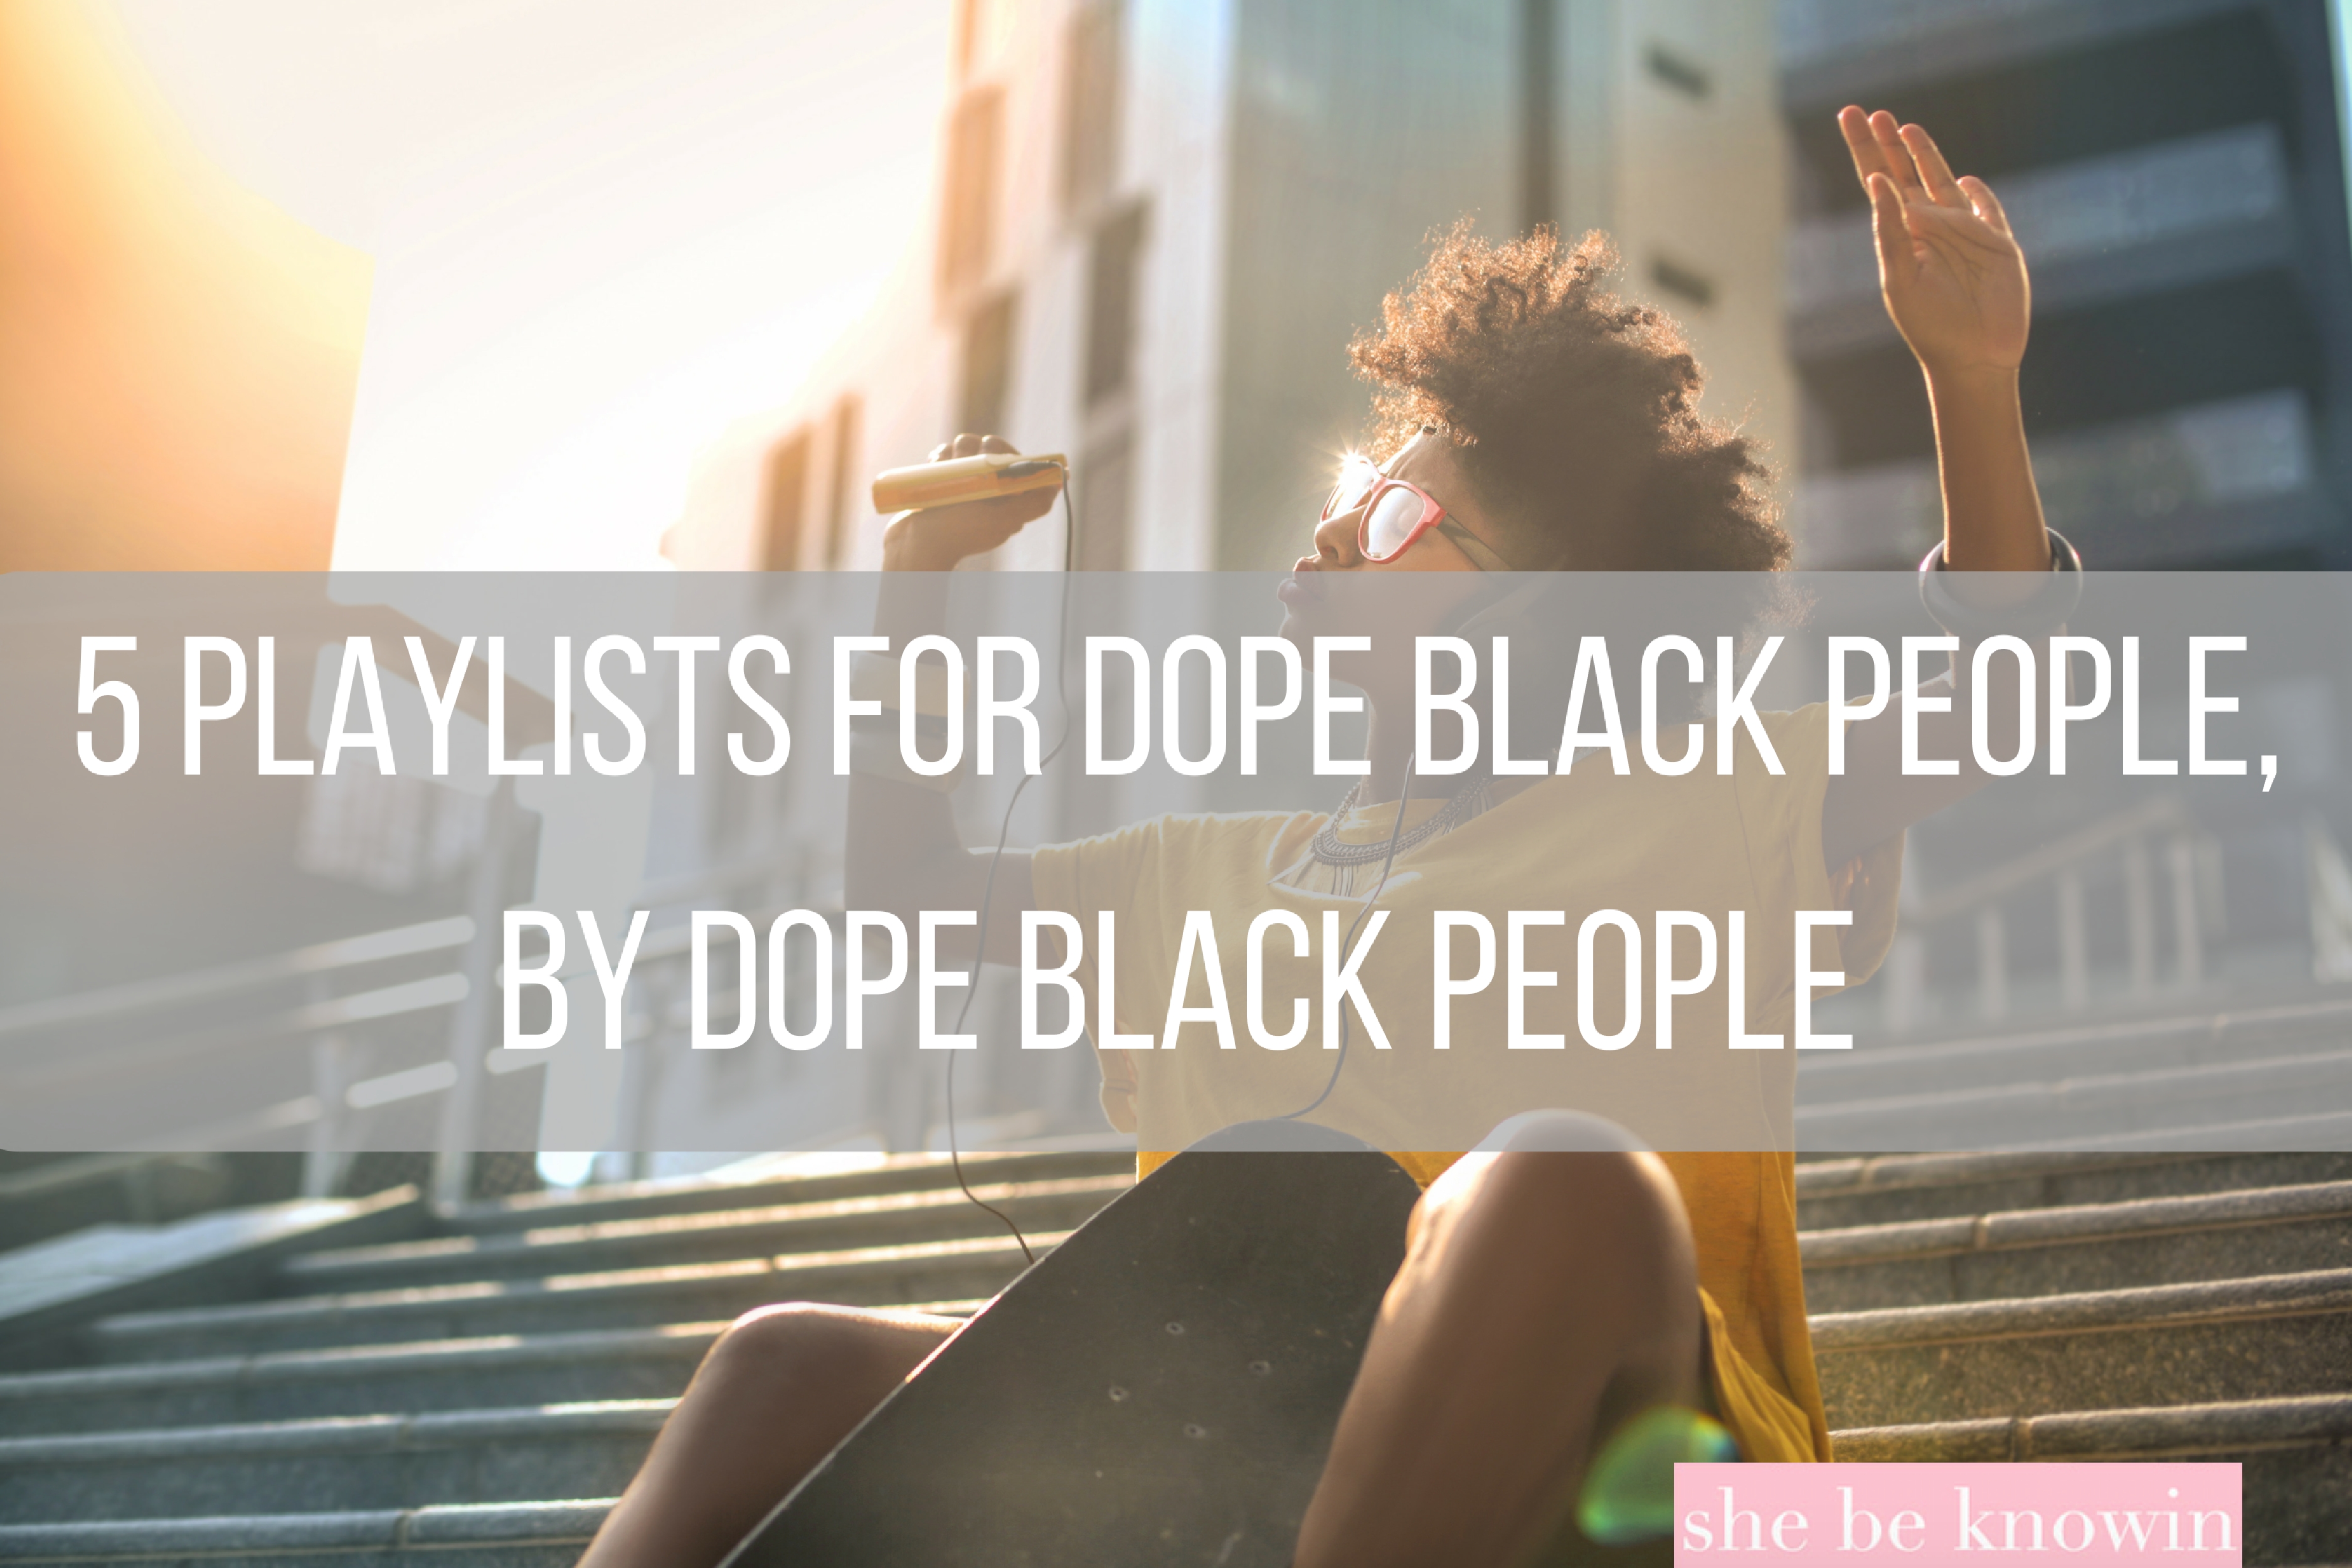 5 Playlists for Dope Black People, By Dope Black People